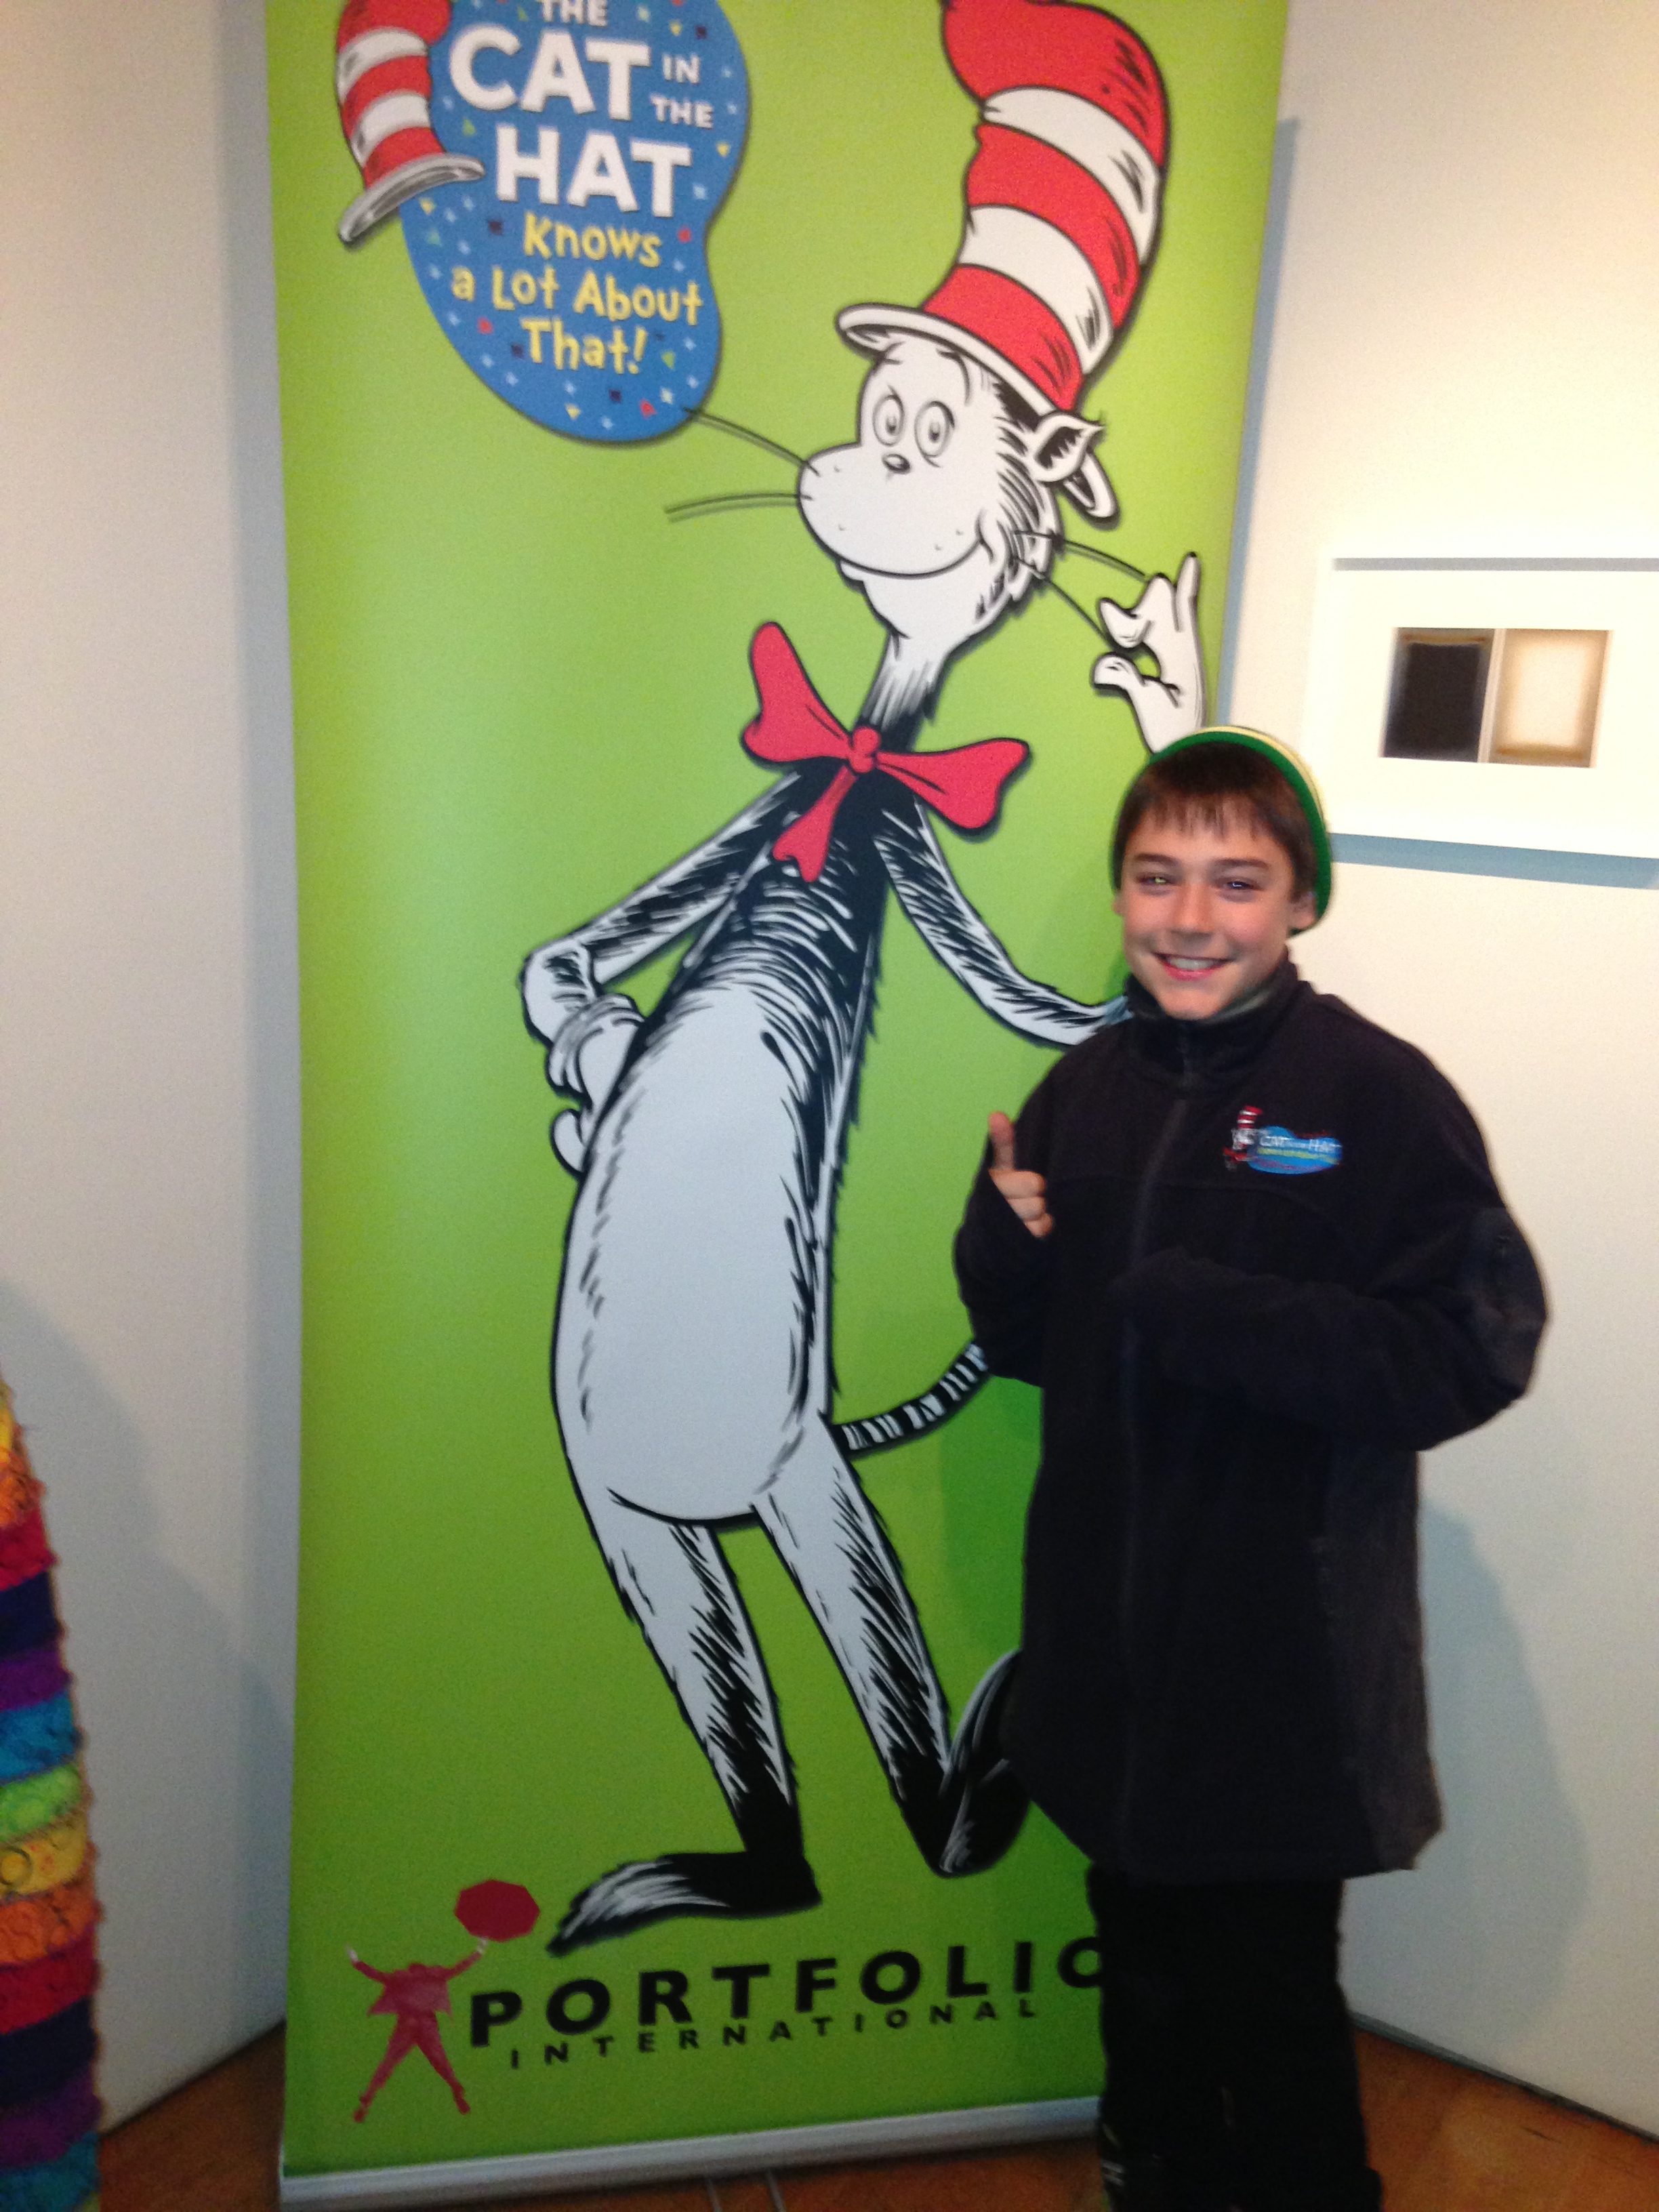 Jacob Ewaniuk at premiere of Cat in the Hat Knows A Lot About Christmas